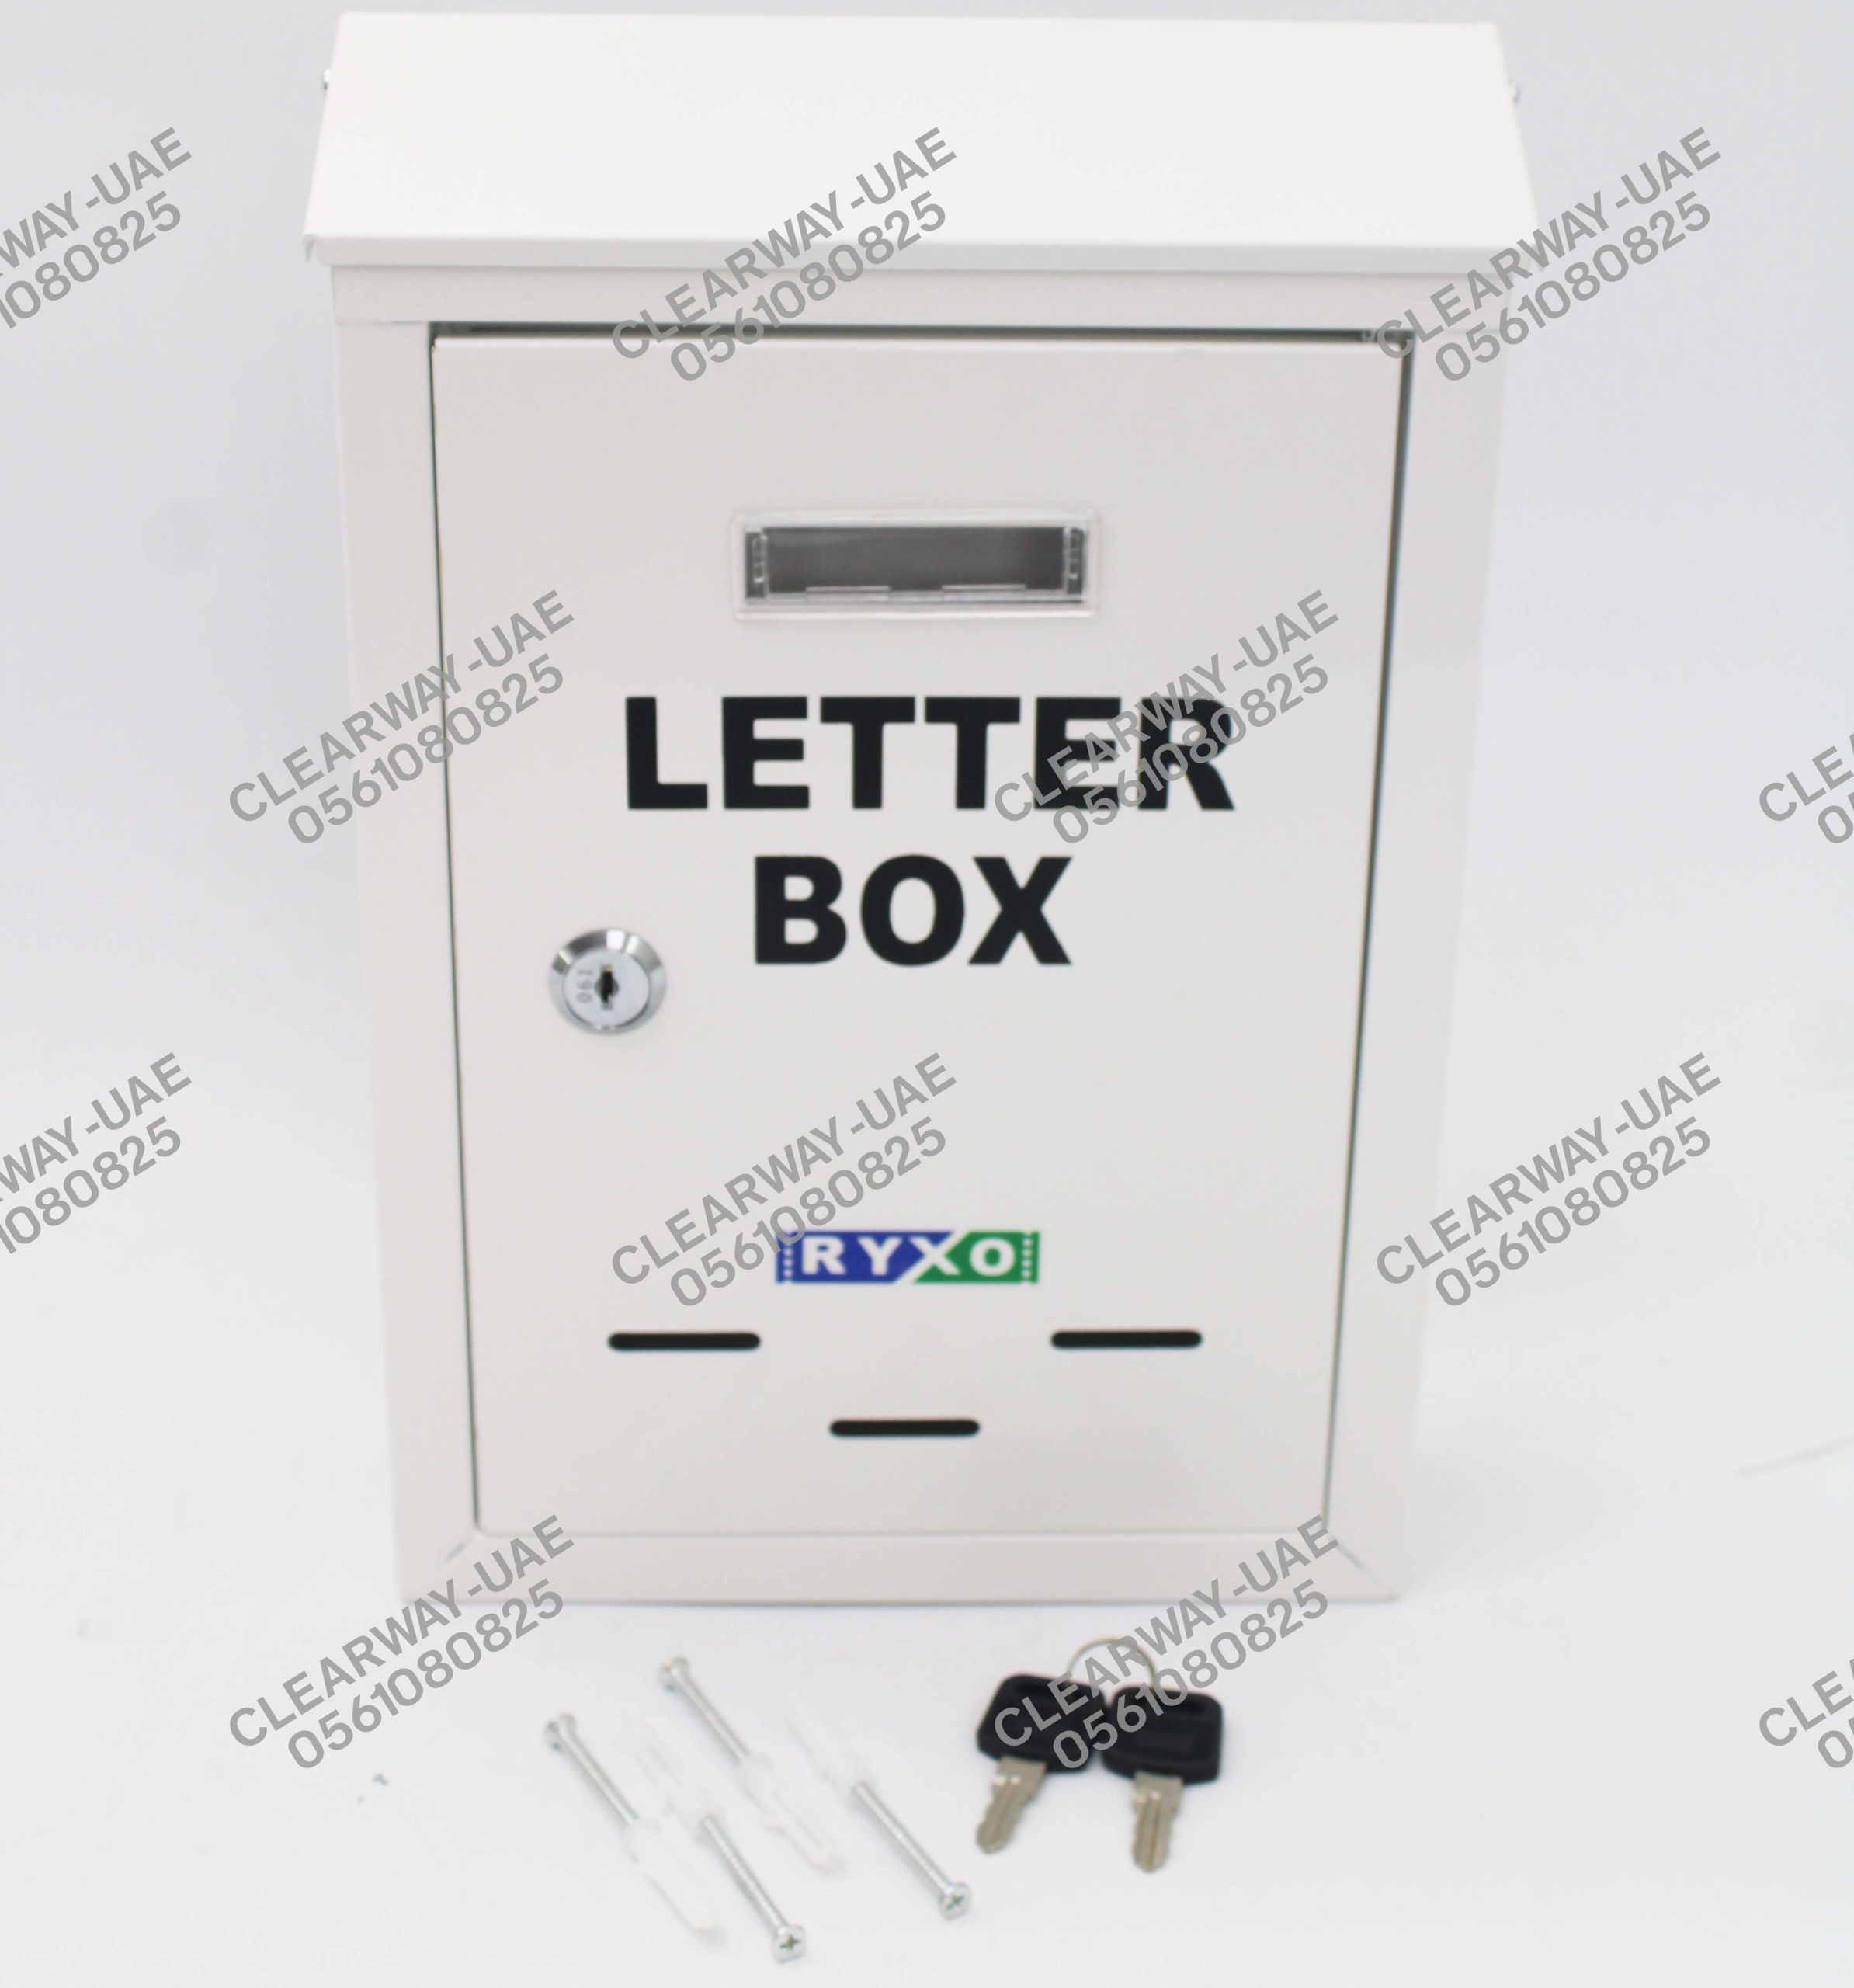 METAL LETTER BOX SMALL SUPPLIER UAE CLEARWAY RYXO SAFETY9